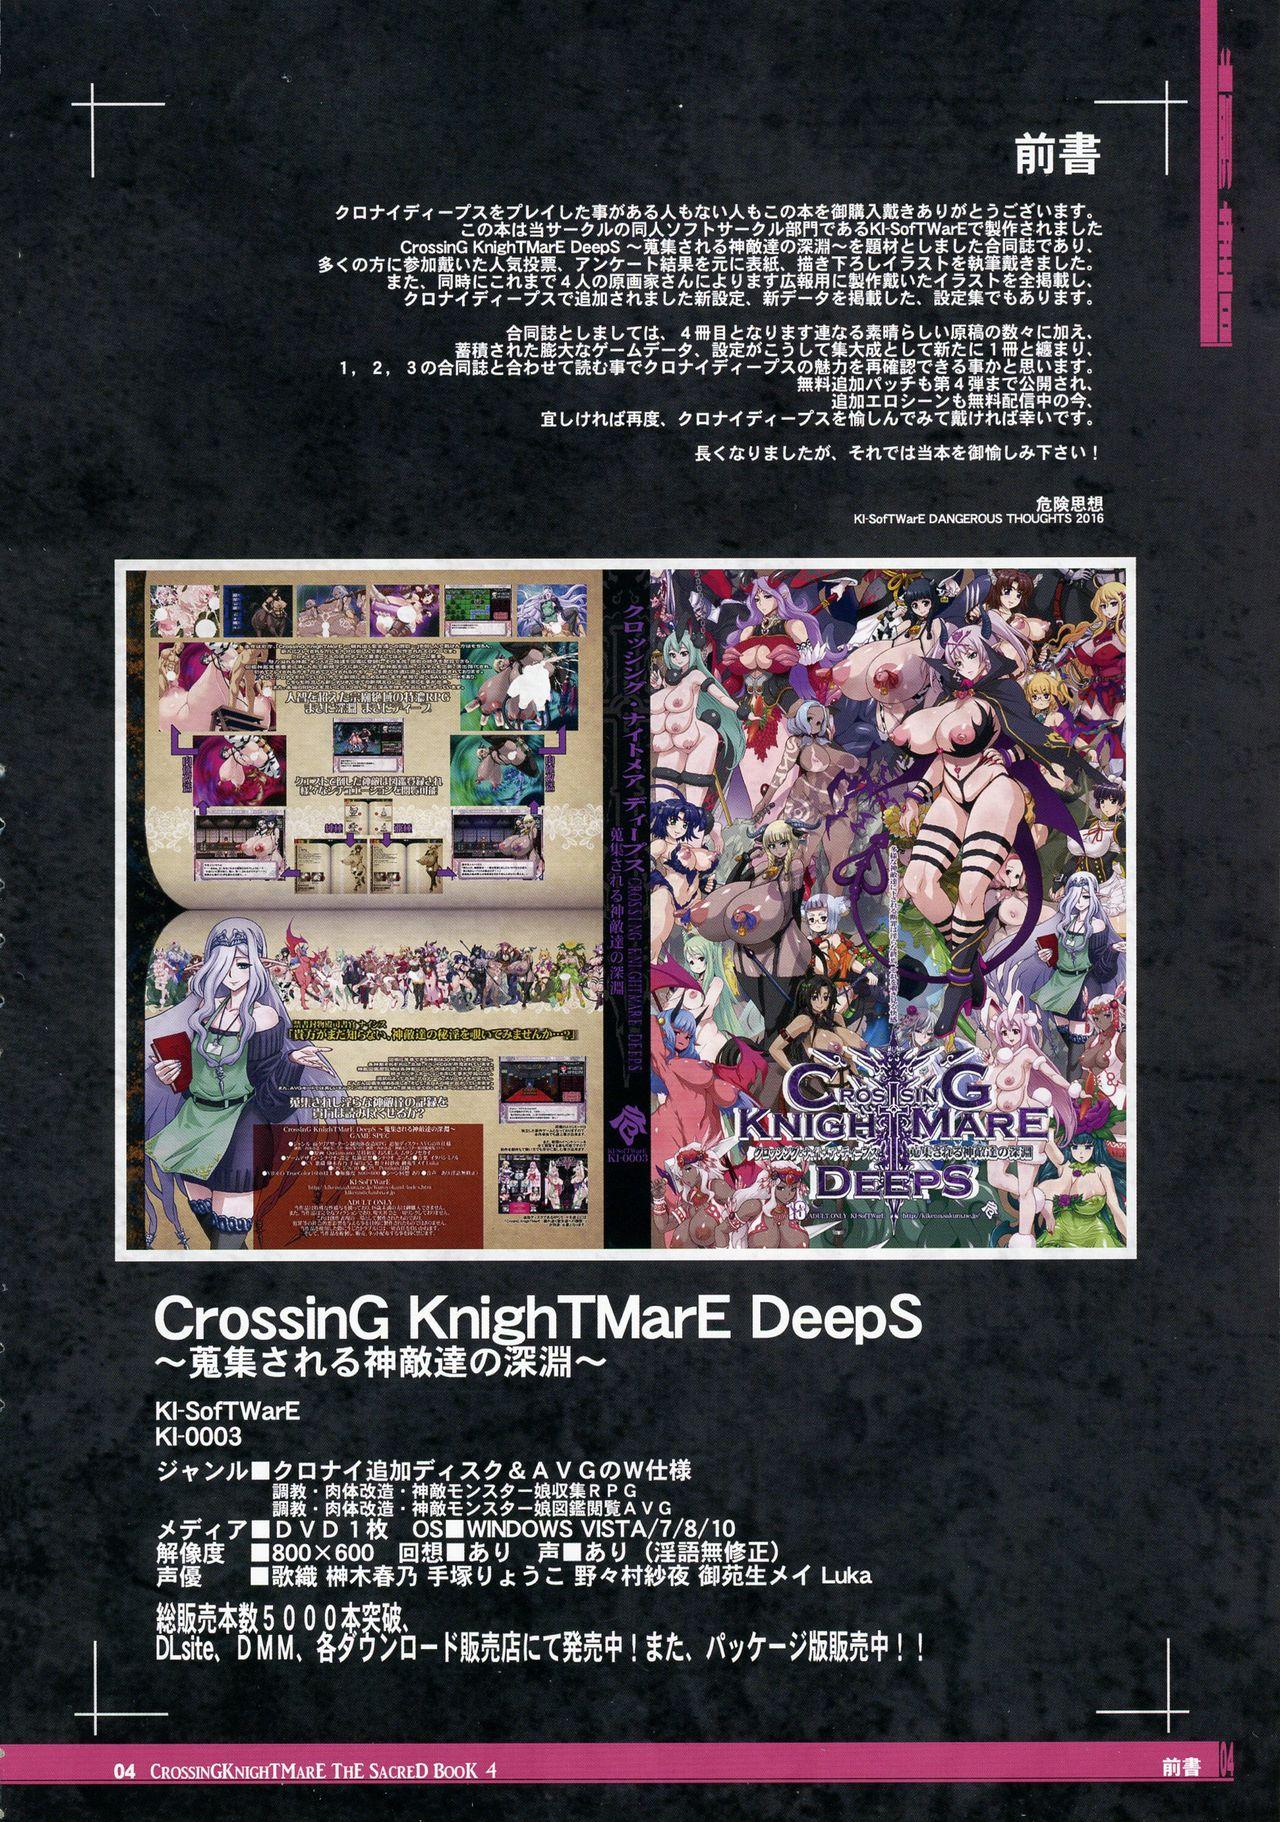 CrossinG KnighTMarE ThE SacreD BooK 4 3